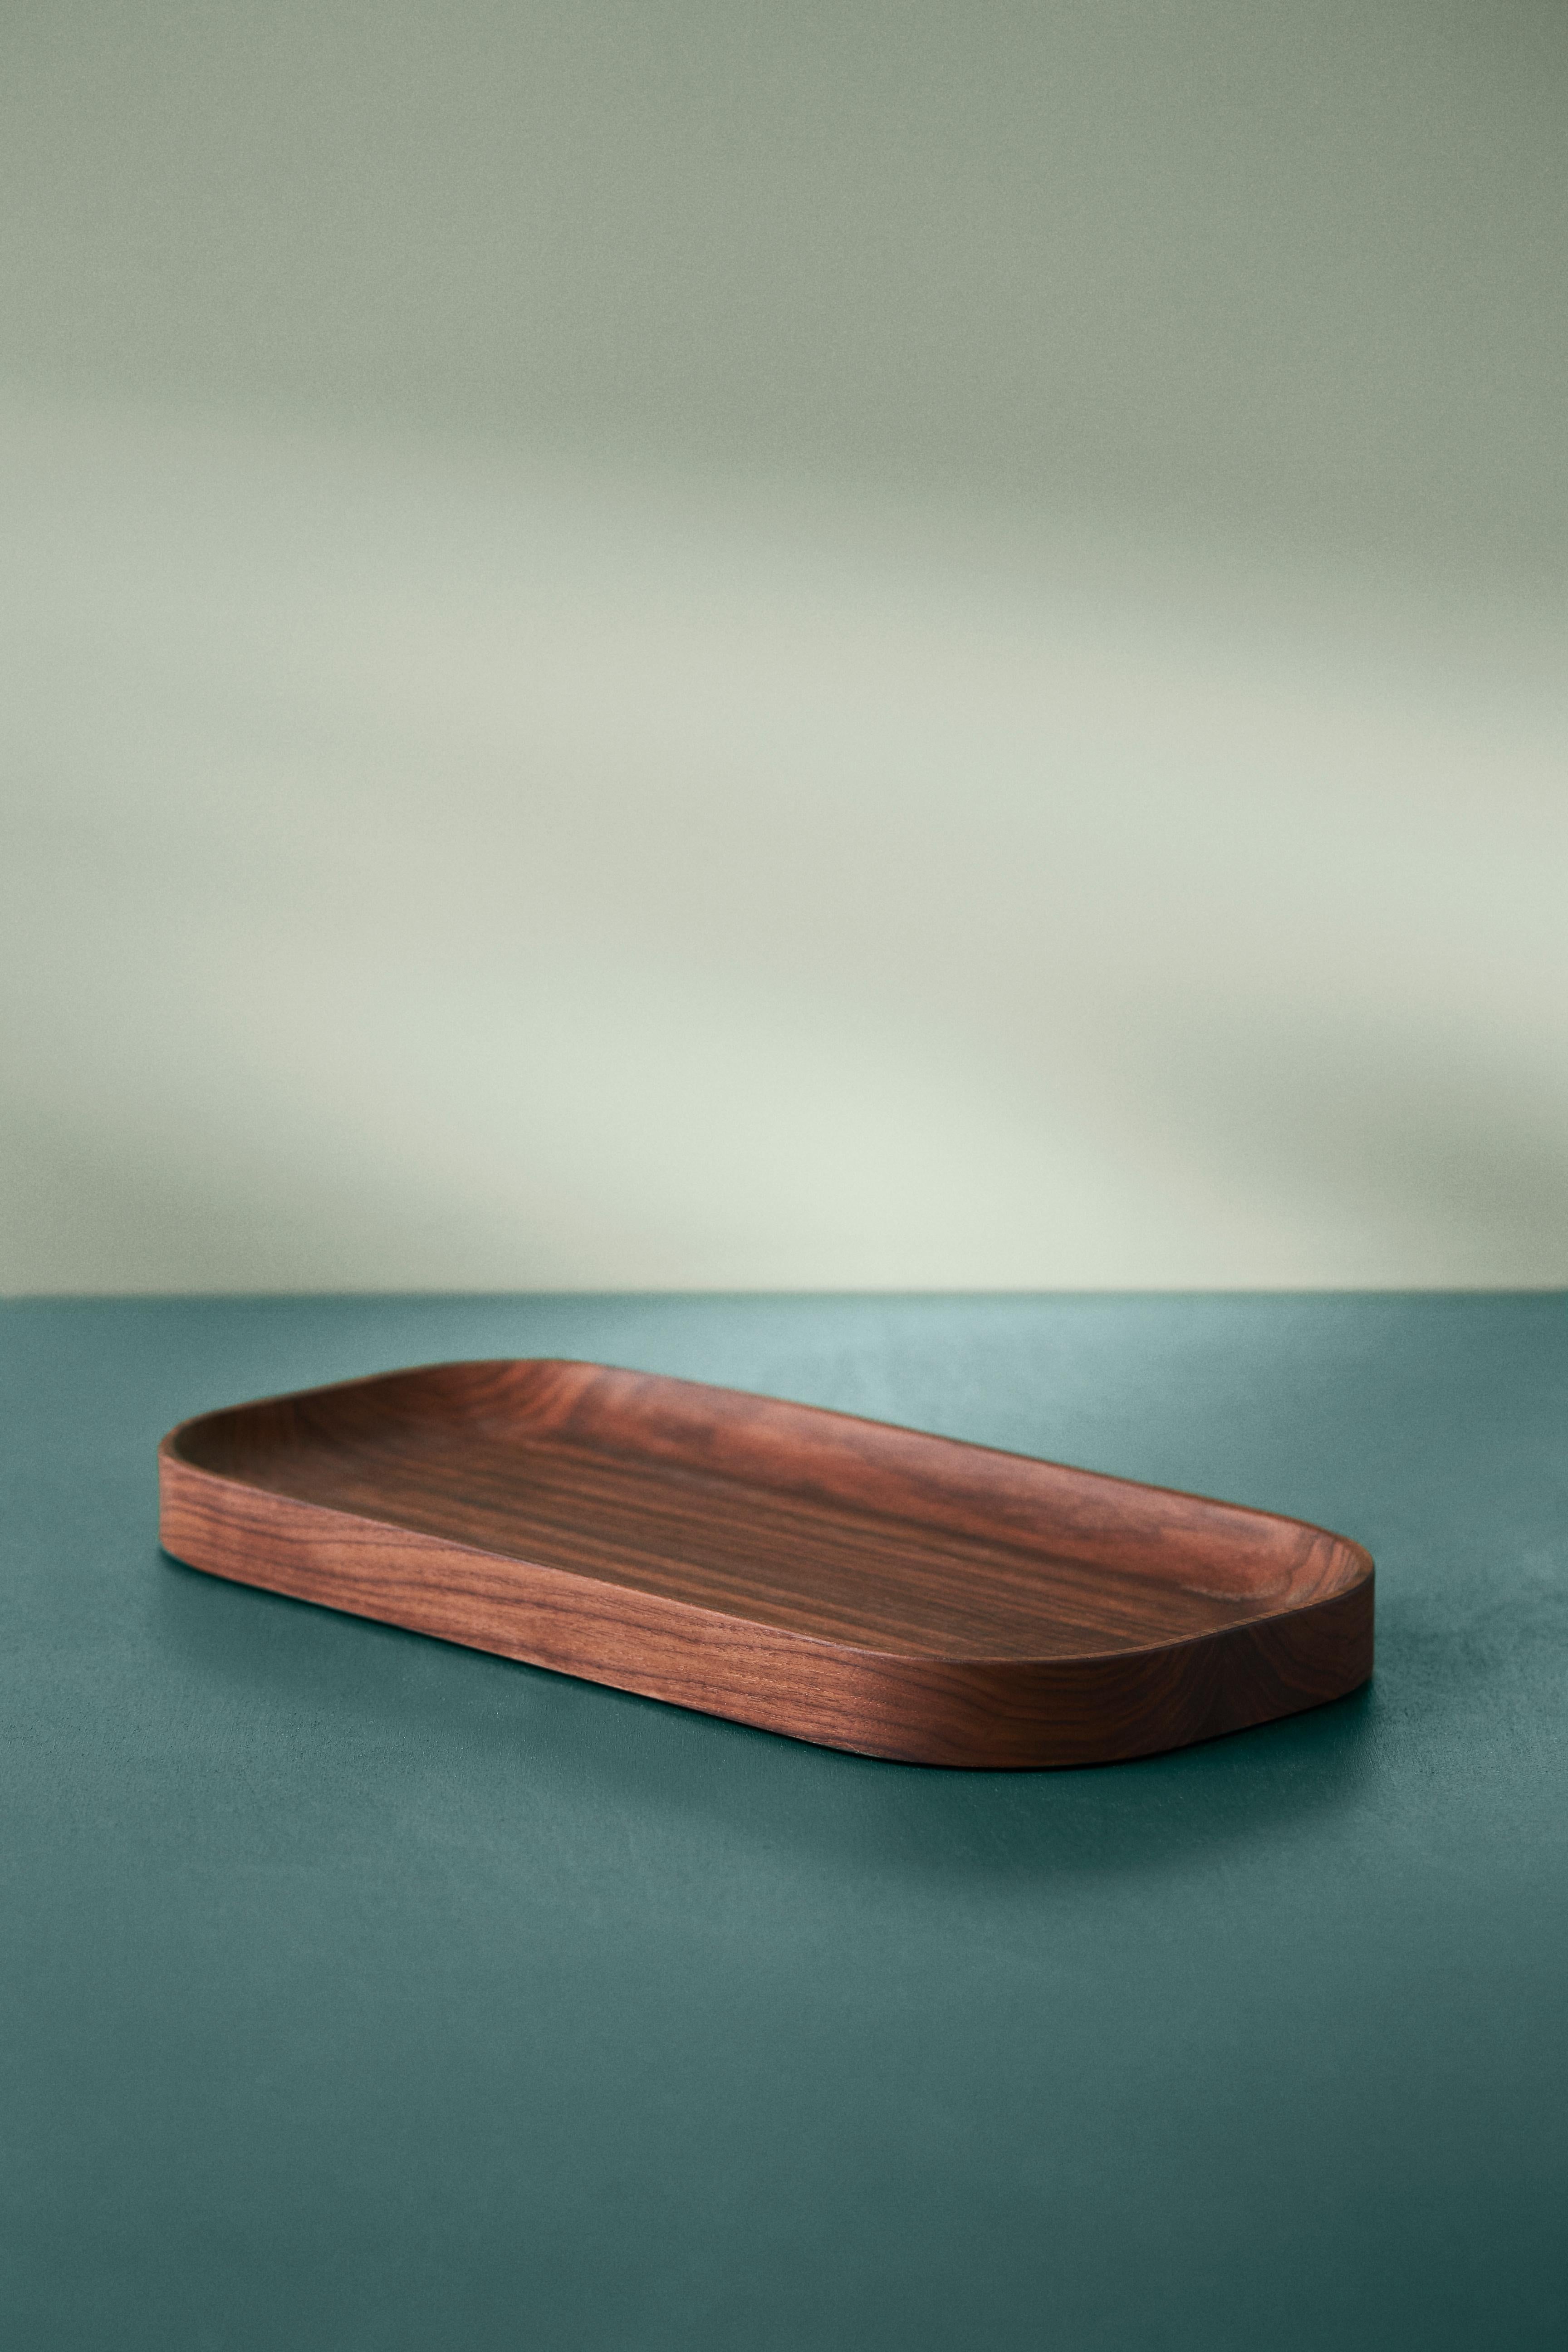 Exquisite wooden trays with an organic design and understated elegance. The carved wood trays are made of solid wood, exuding an exclusivity that makes them a beautiful bed for fruit, vegetables and nuts, an elegant design element in a still life